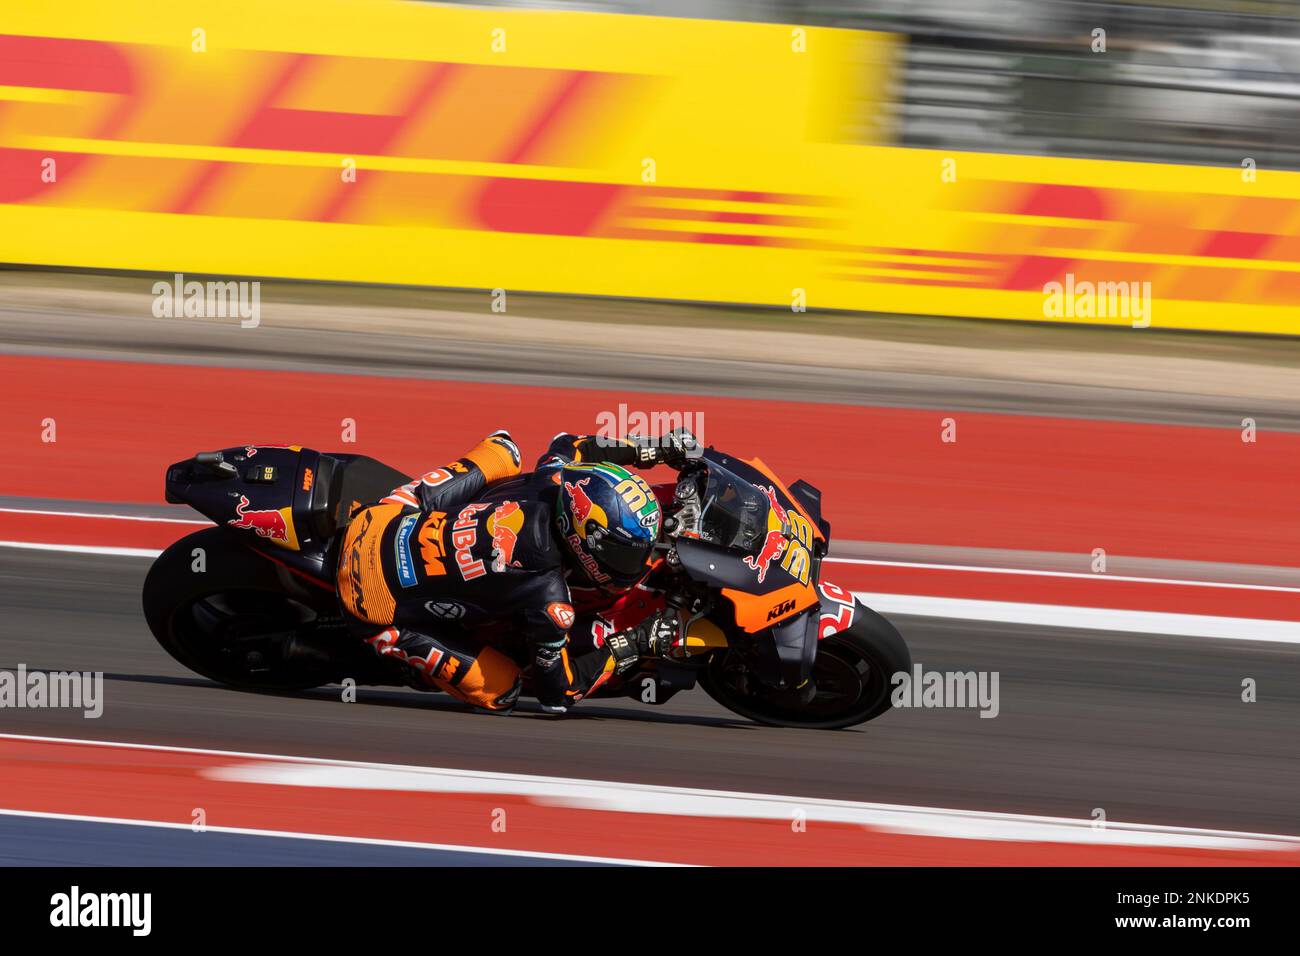 AUSTIN, TX - APRIL 08: Brad Binder of South Africa and Red Bull KTM Factory  Racing rides through turn six during Free Practice 1 of the MotoGP Red Bull  Grand Prix of